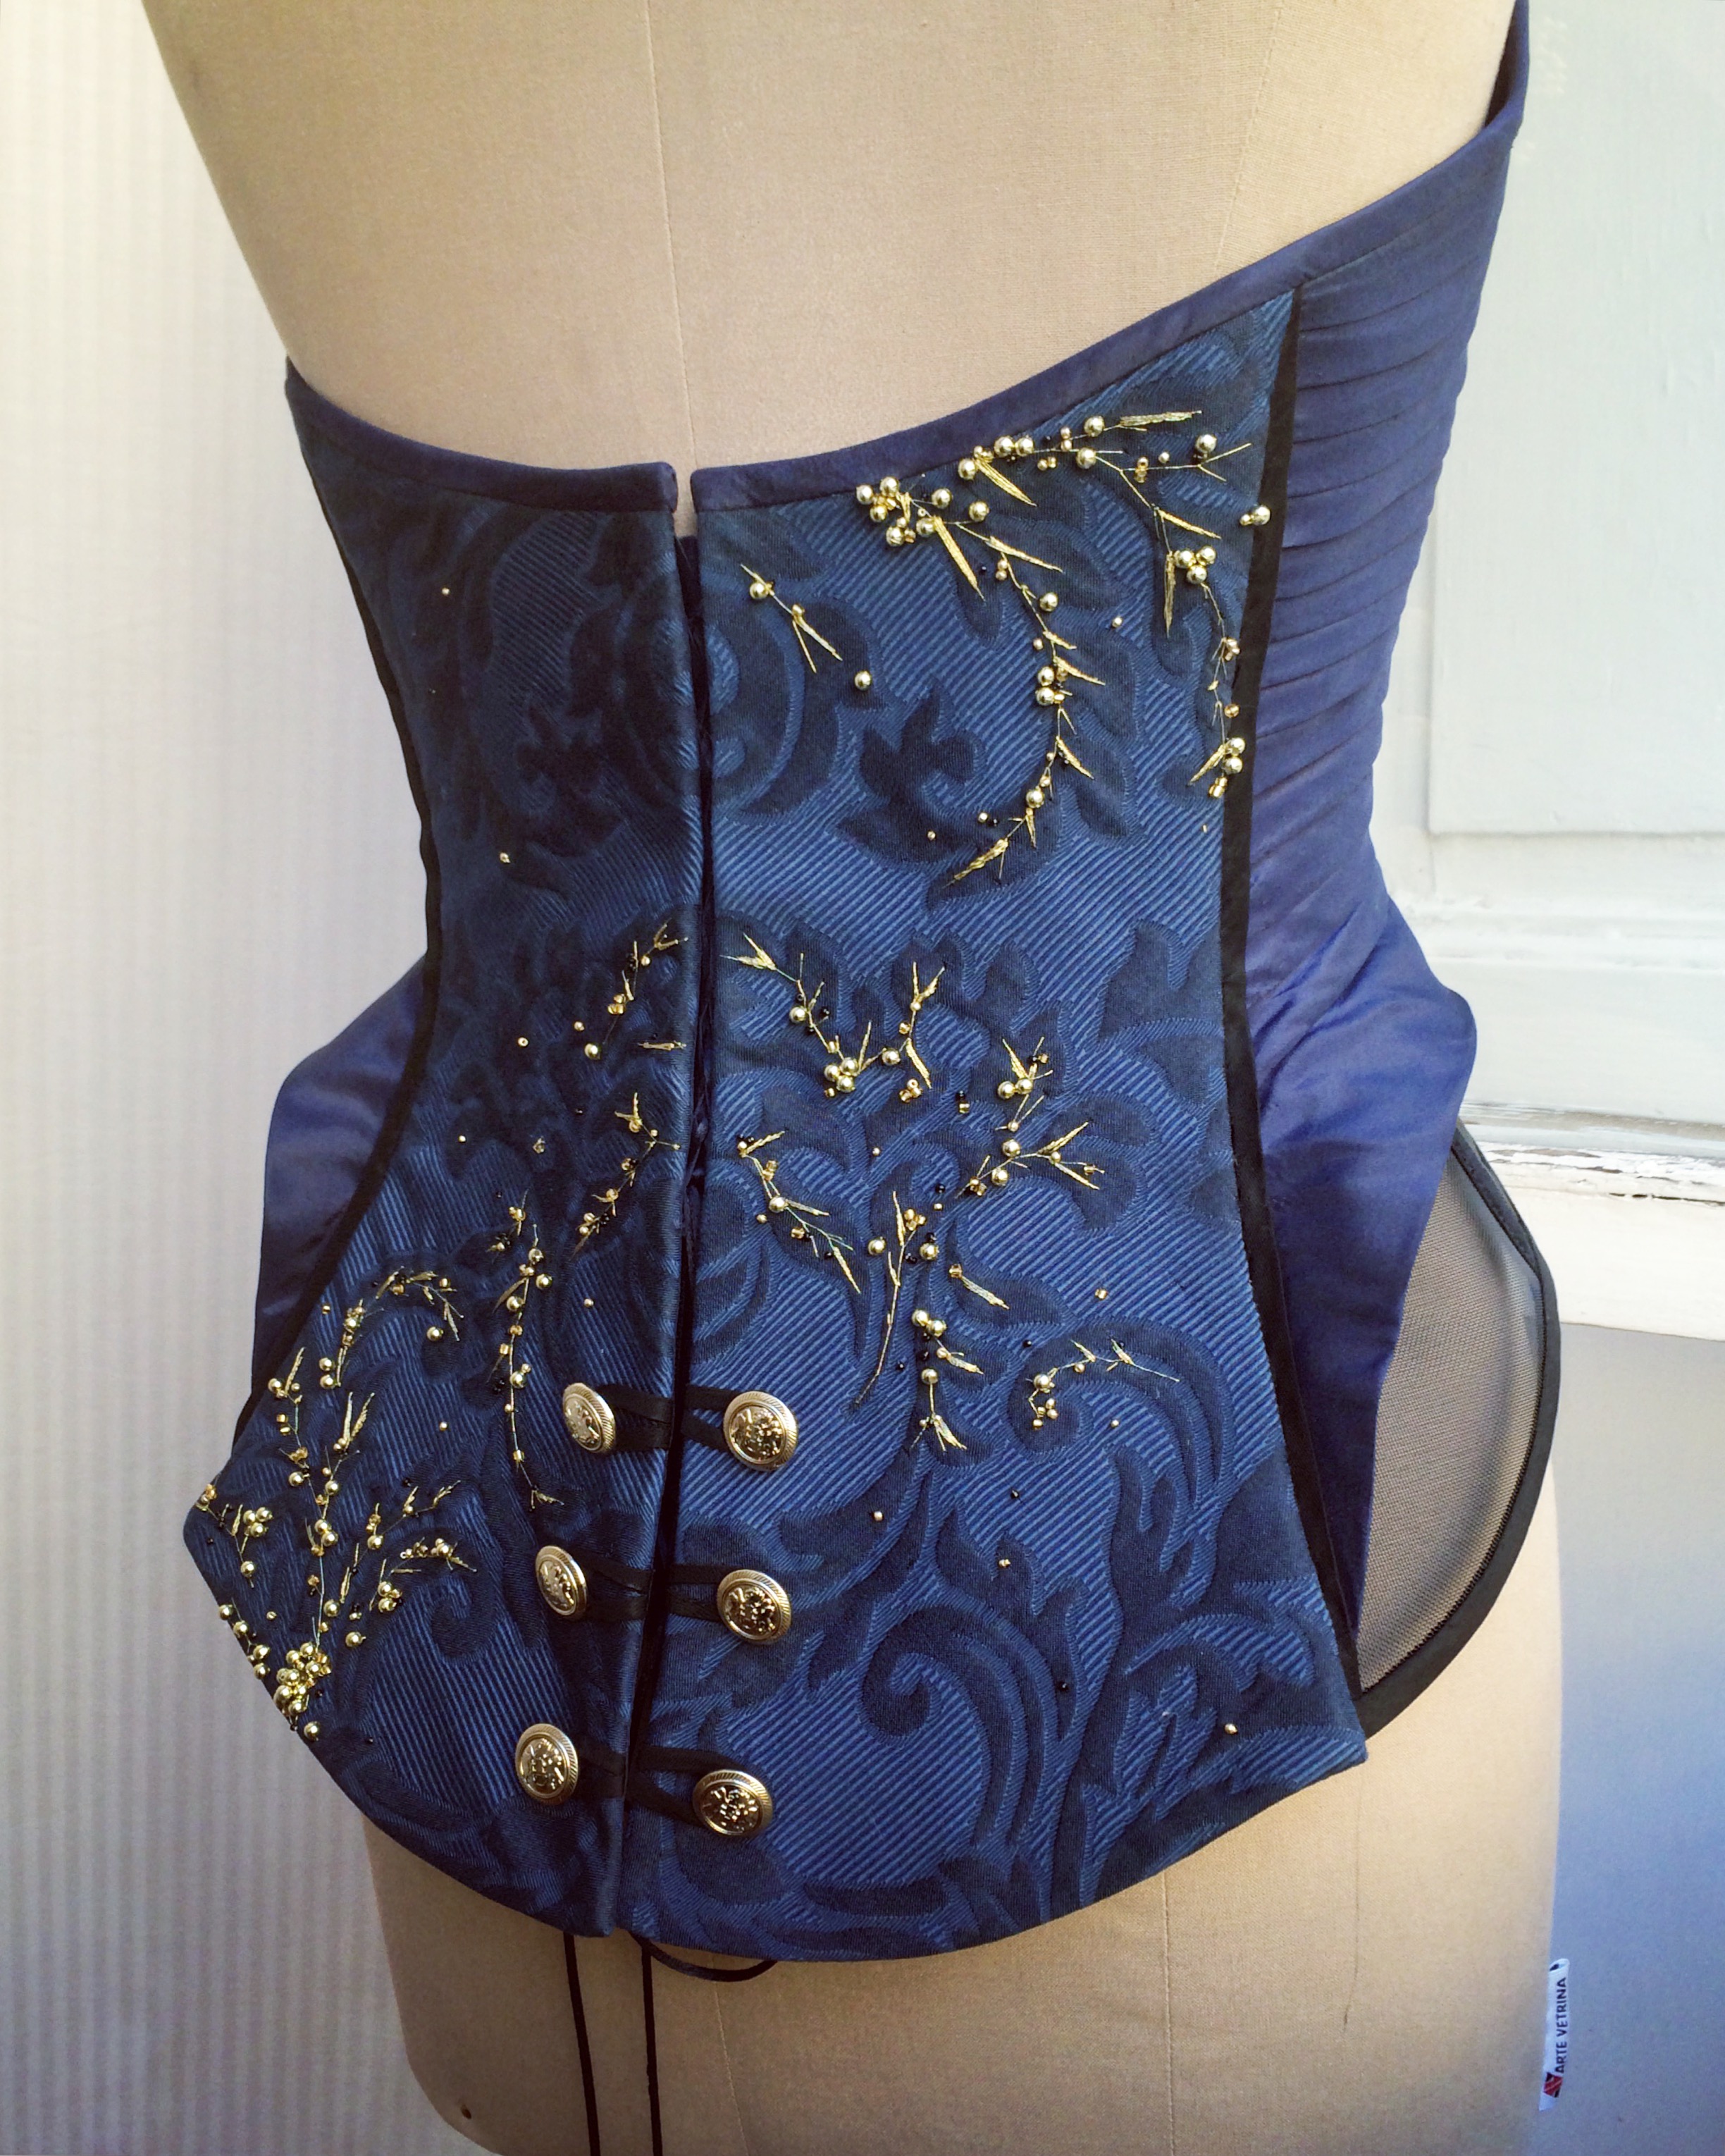  "Anna Karenina" inspired couture bustier (back) 